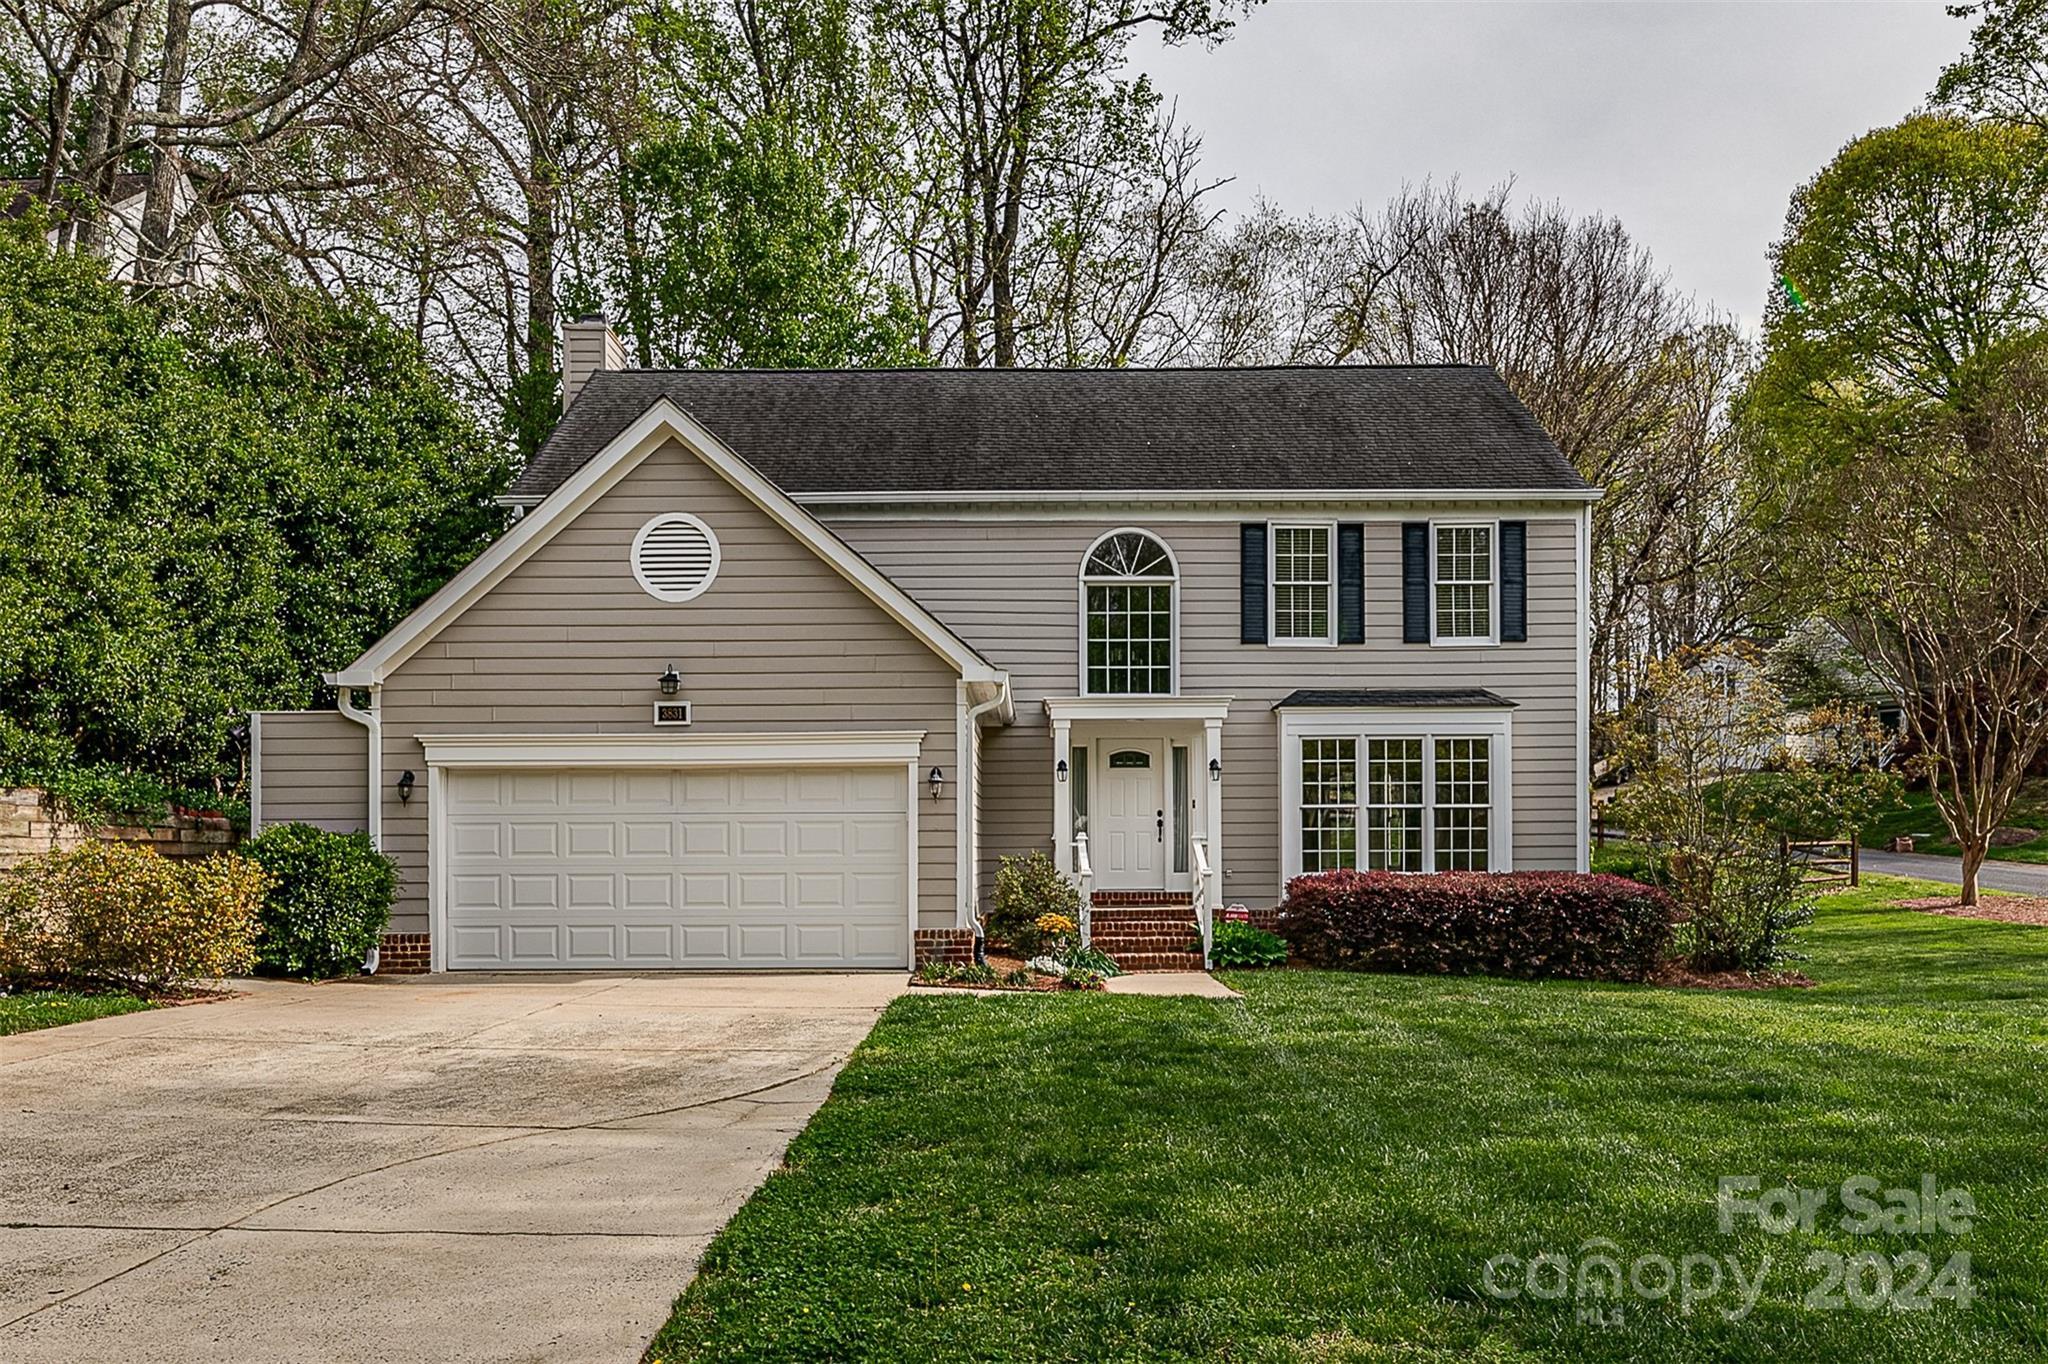 Photo one of 3831 Brownes Ferry Rd Charlotte NC 28269 | MLS 4125096